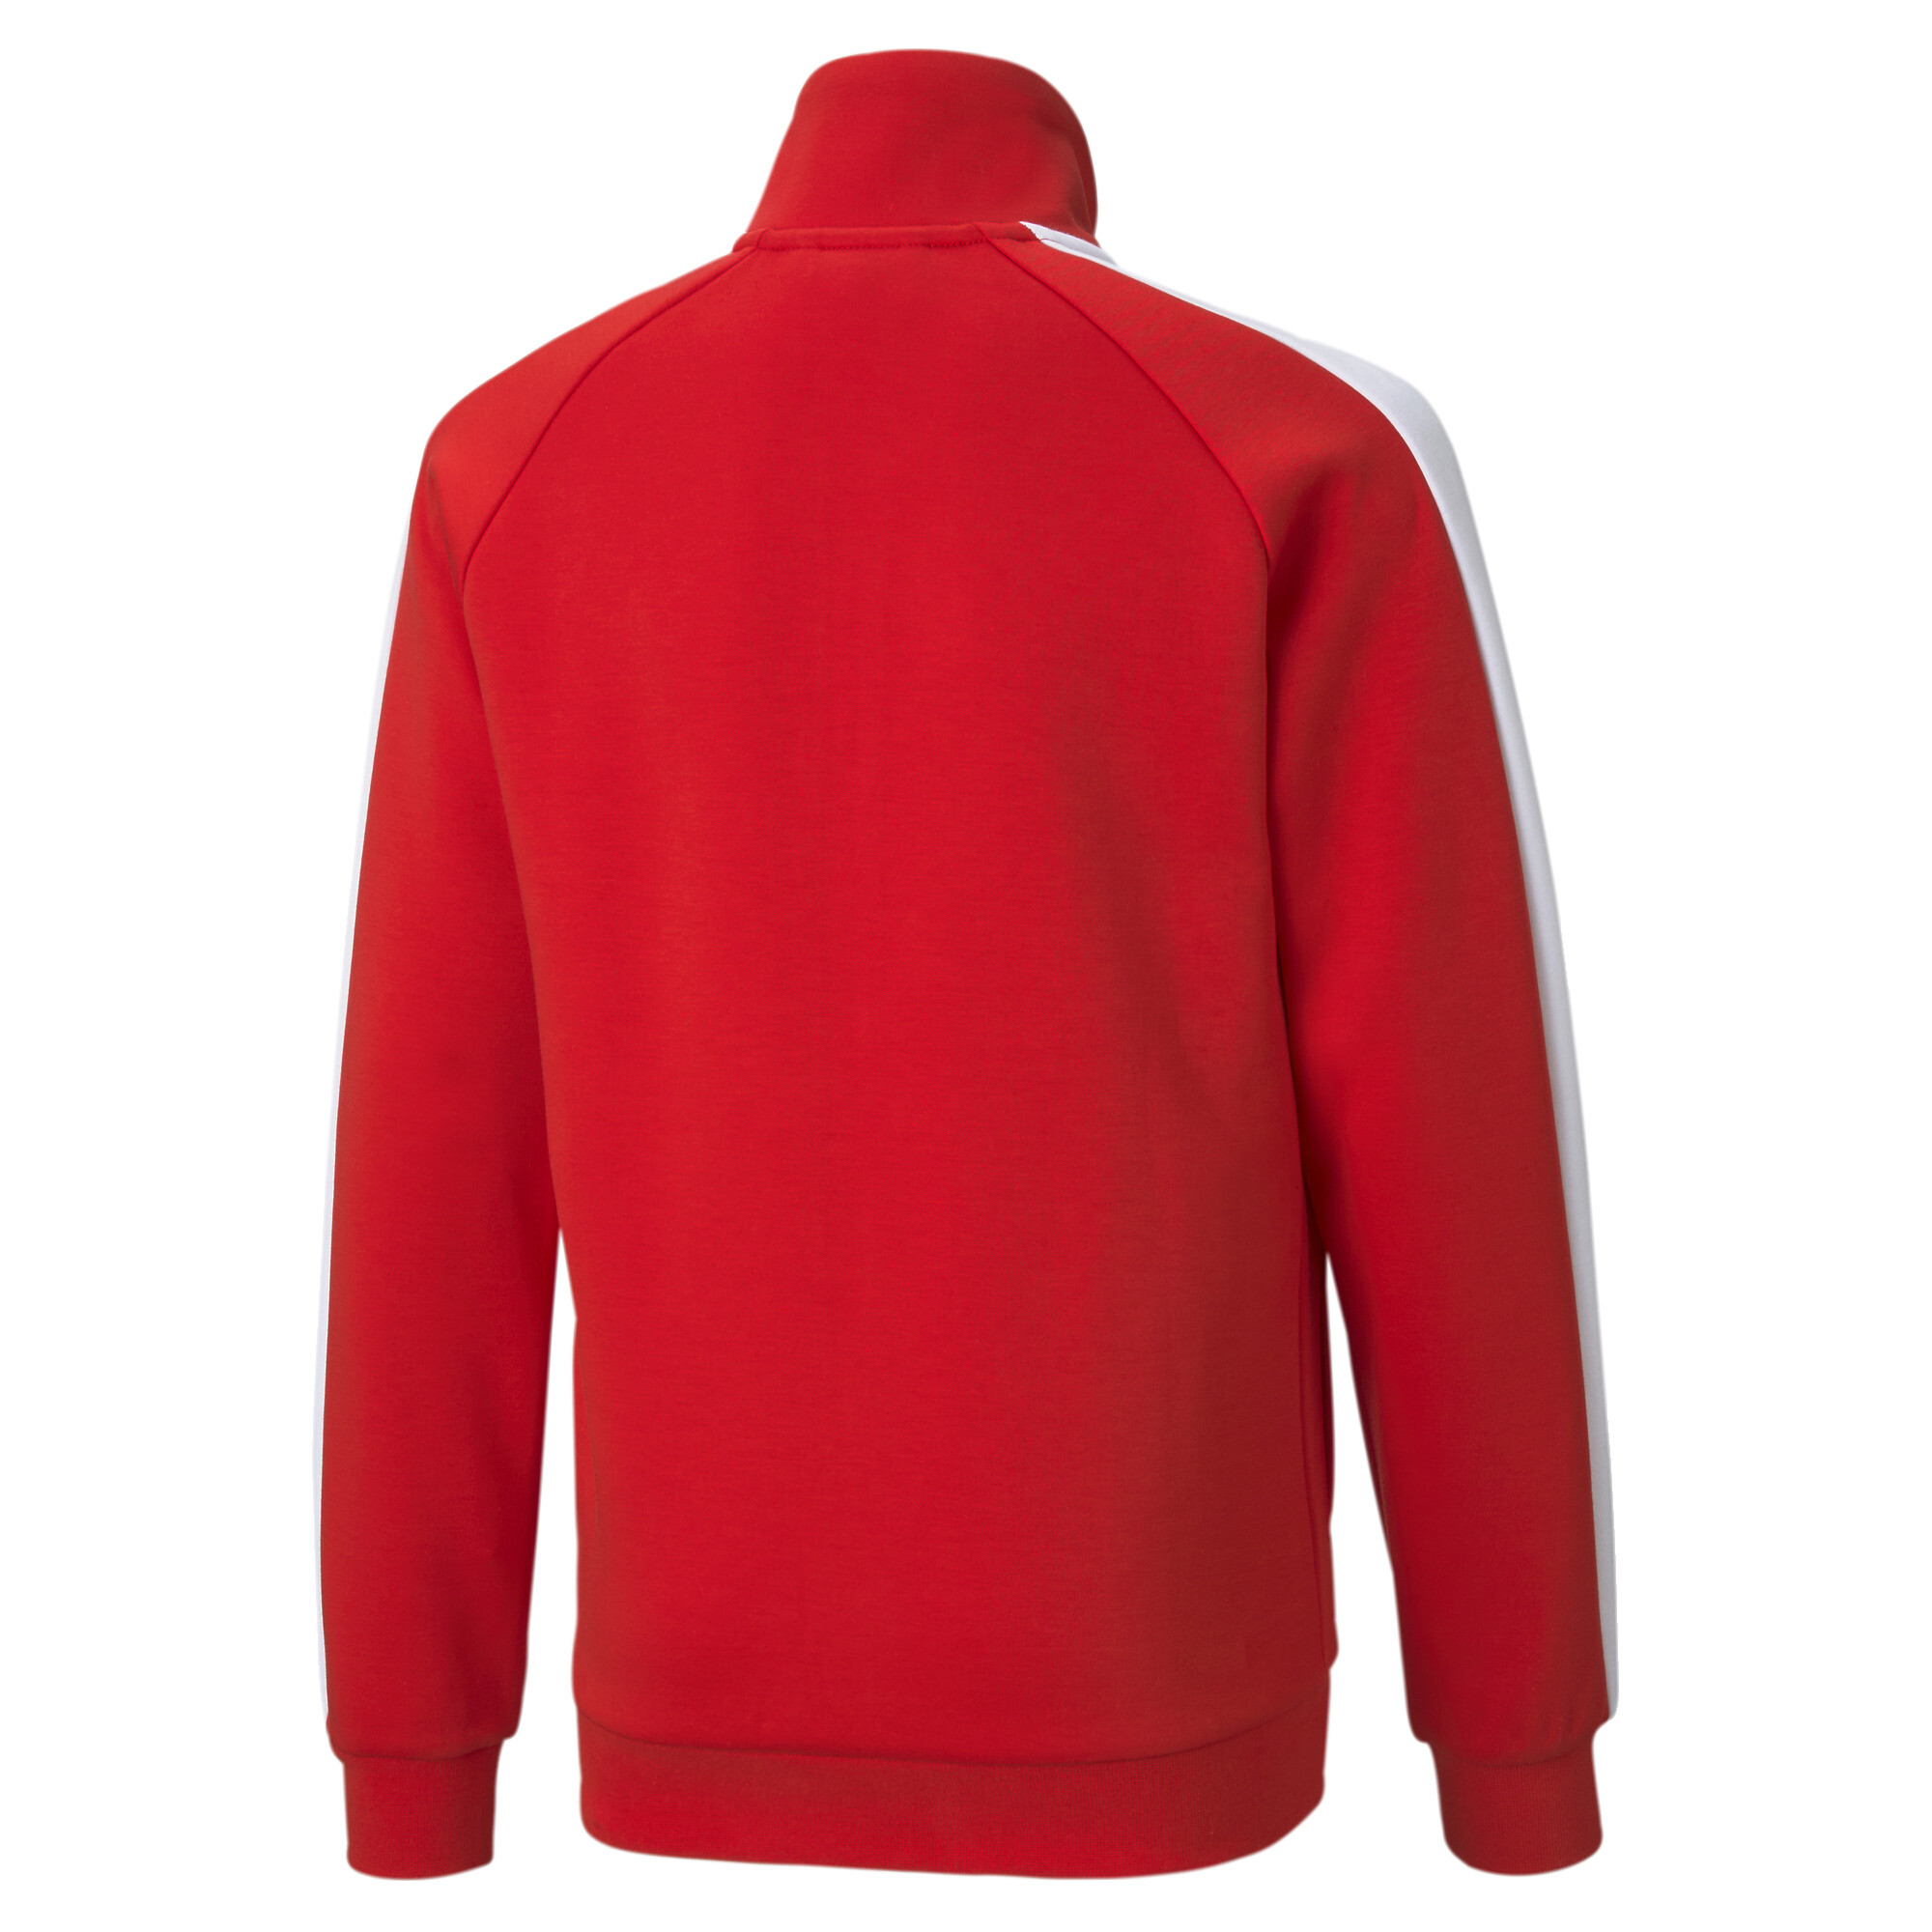 Men's Puma Iconic T7 Youth Track Jacket, Red, Size 5-6Y, Clothing